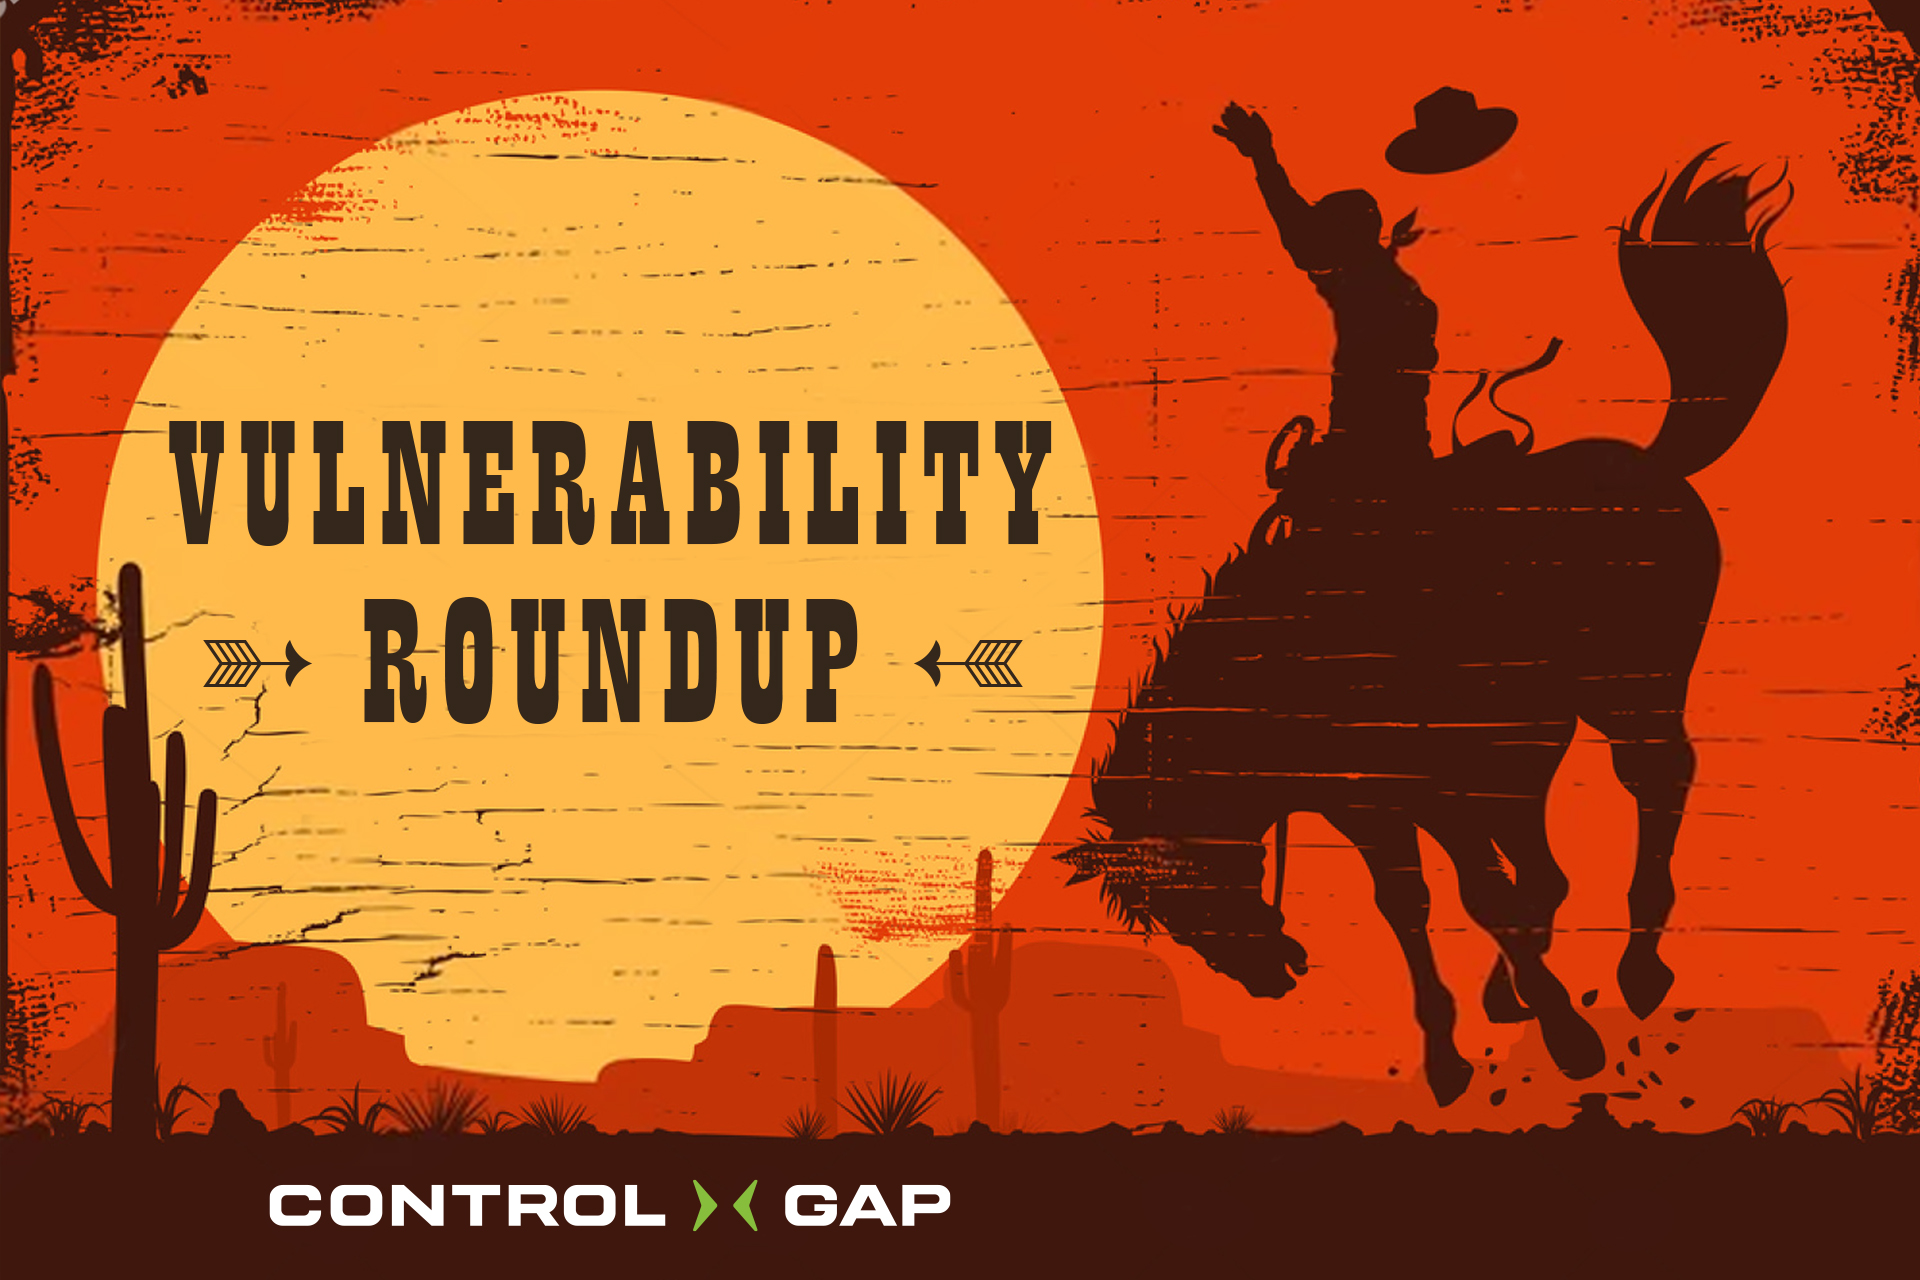 Control Gap Vulnerability Roundup: March 4th to March 10th